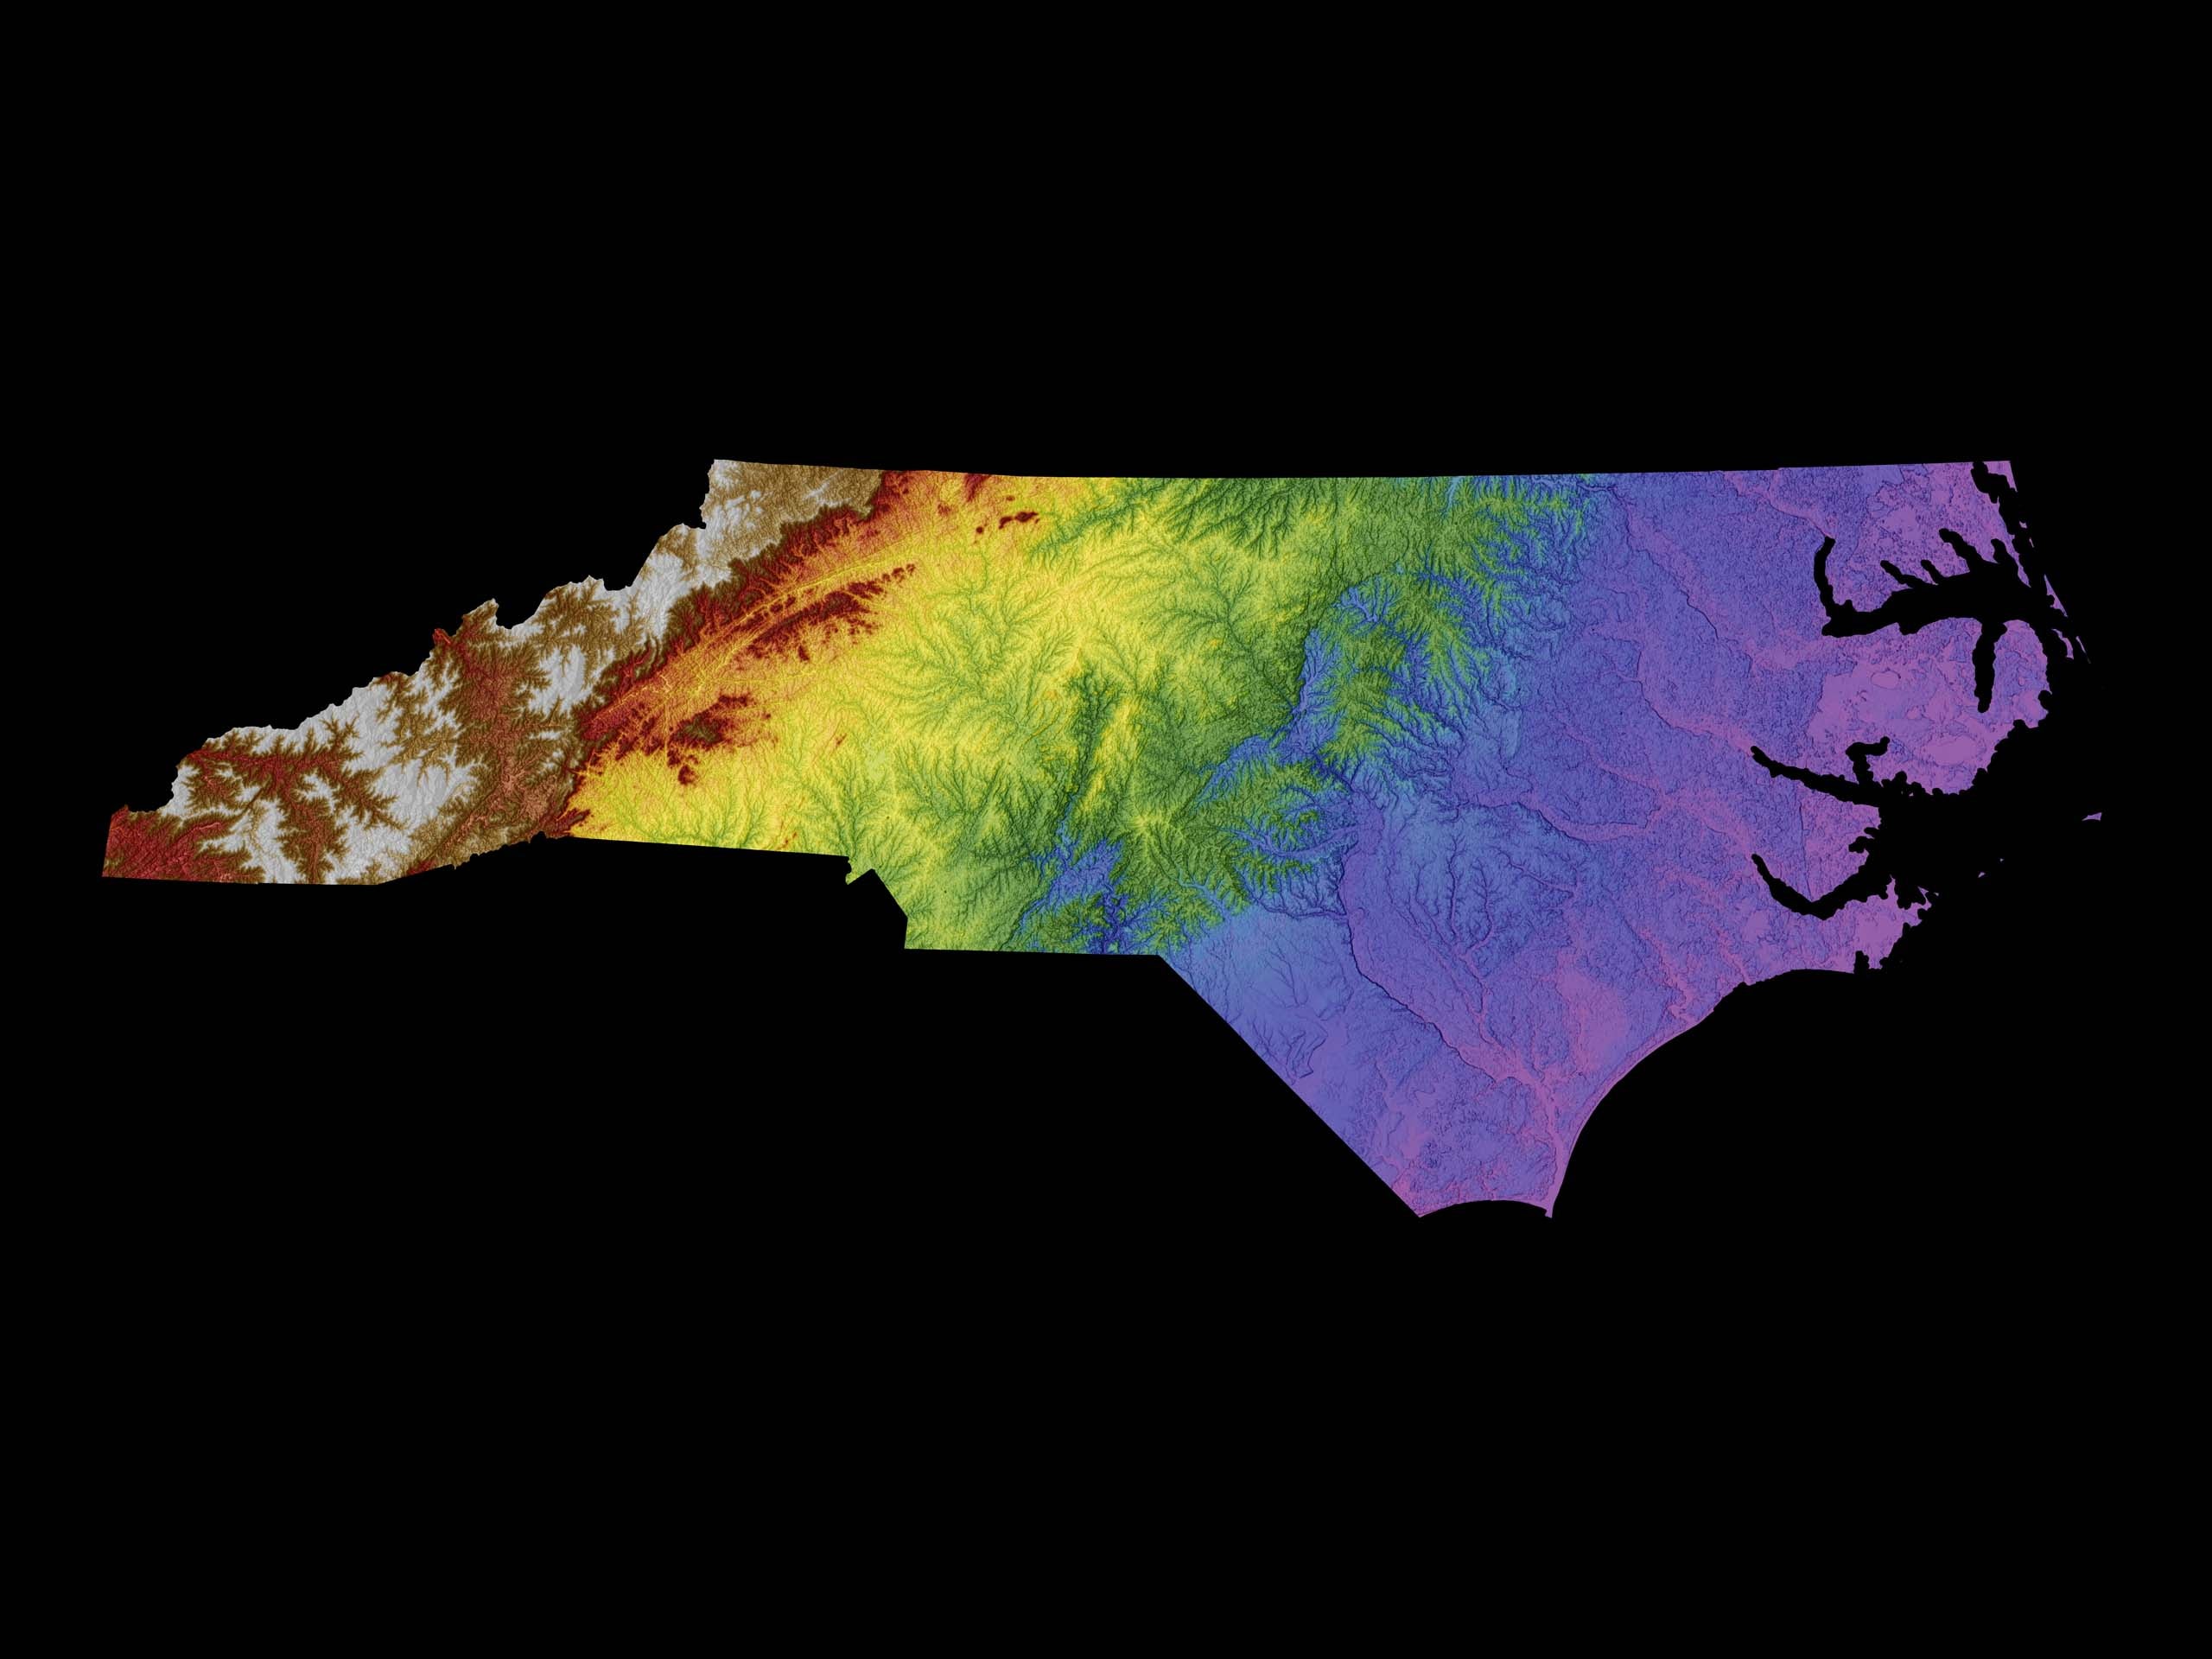 North Carolina Color Elevation Map Wall Art Poster Print With Black Background